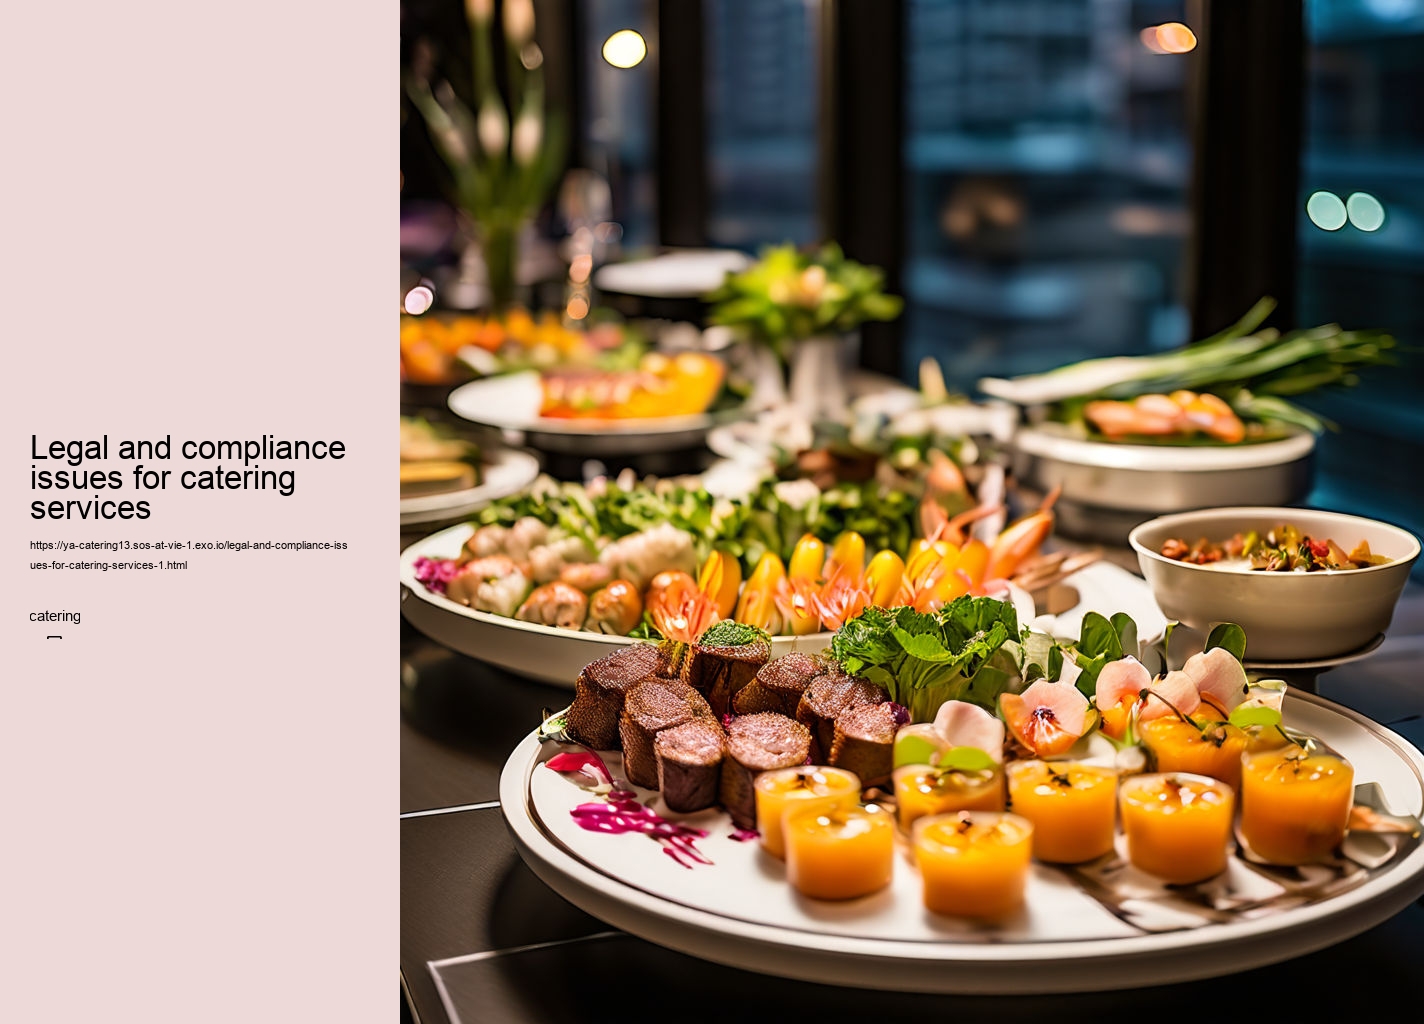 Legal and compliance issues for catering services